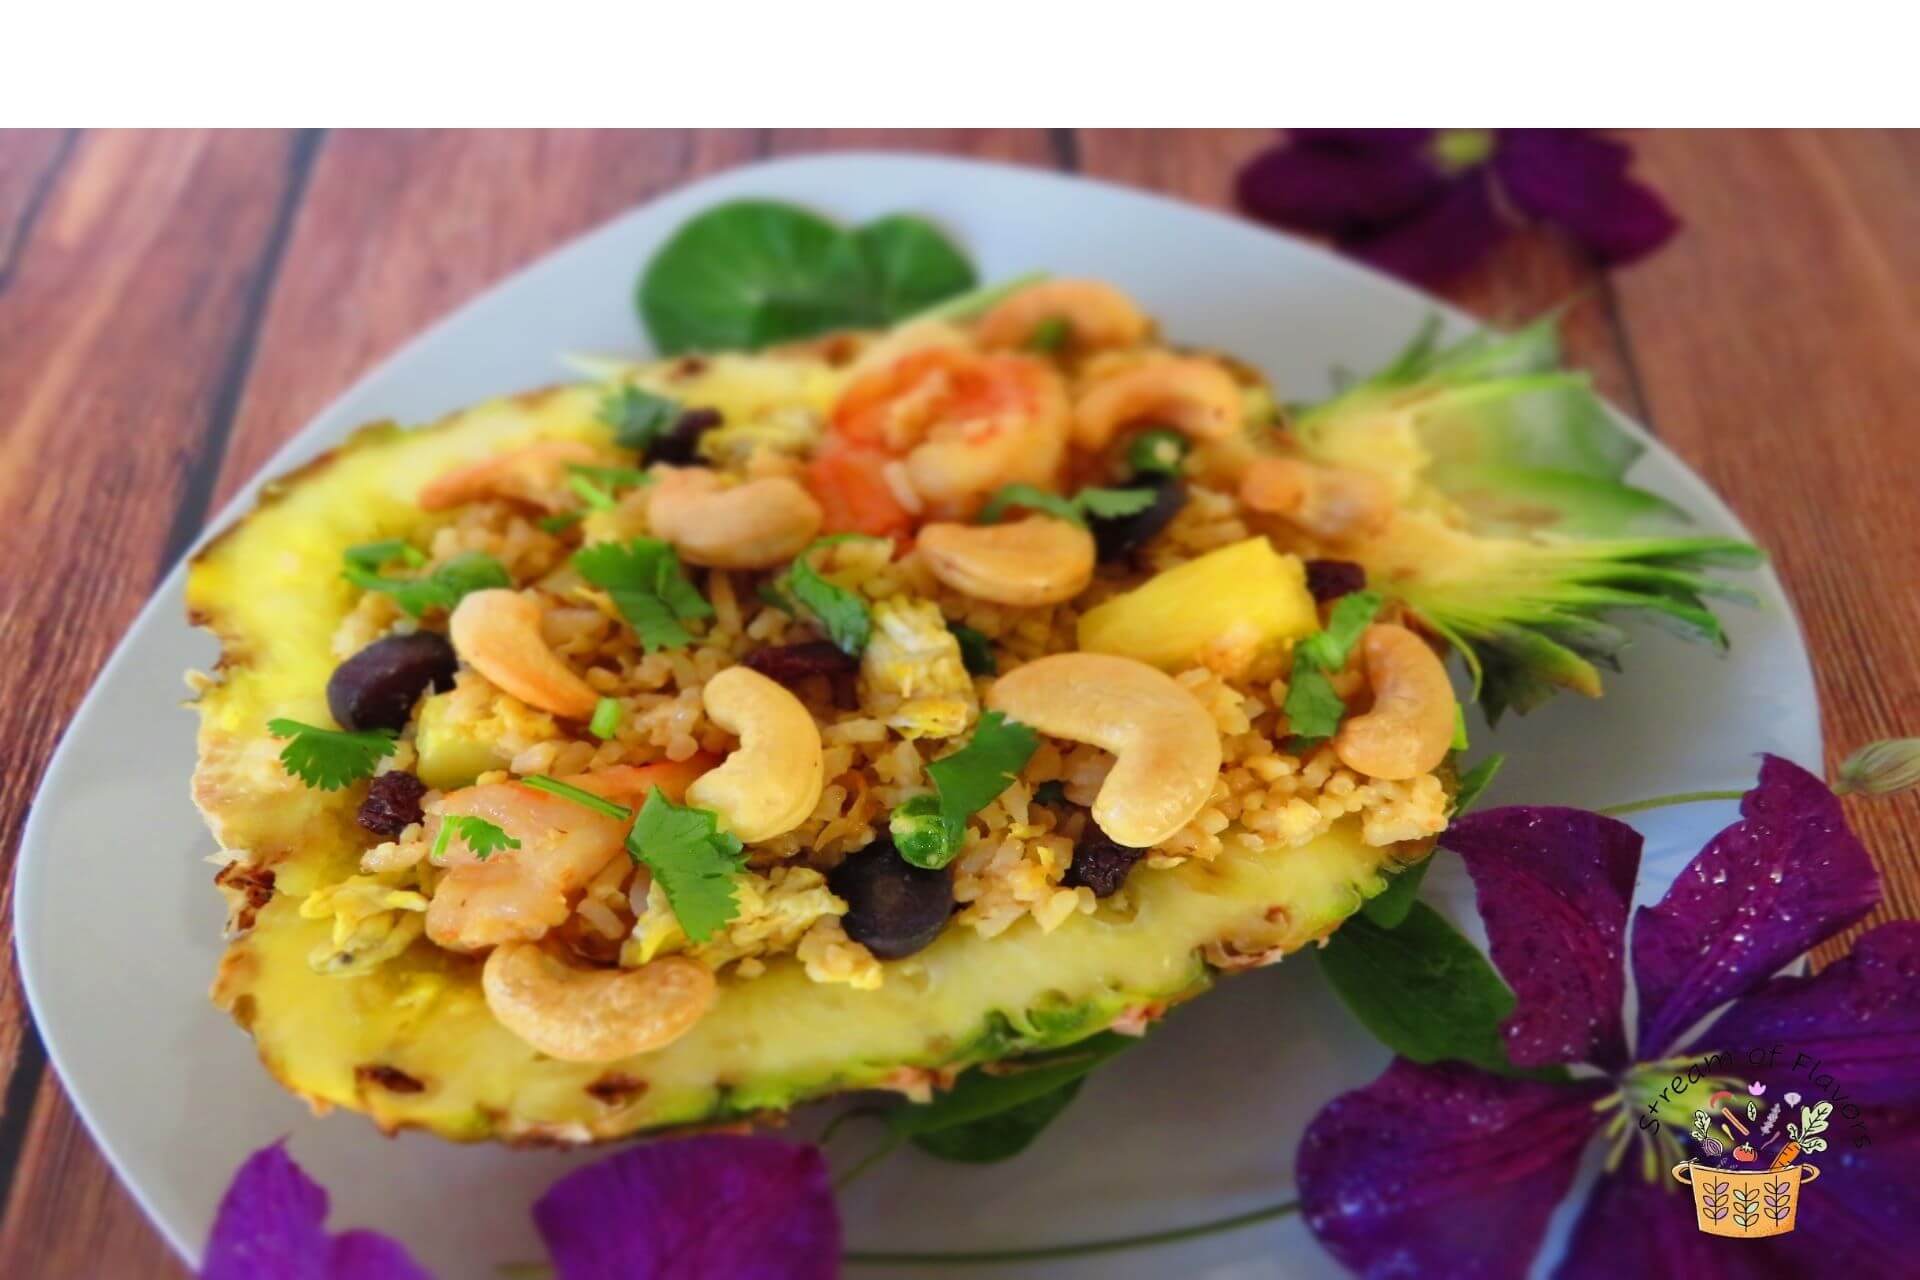 Thai Pineapple fried rice in a pineapple shell